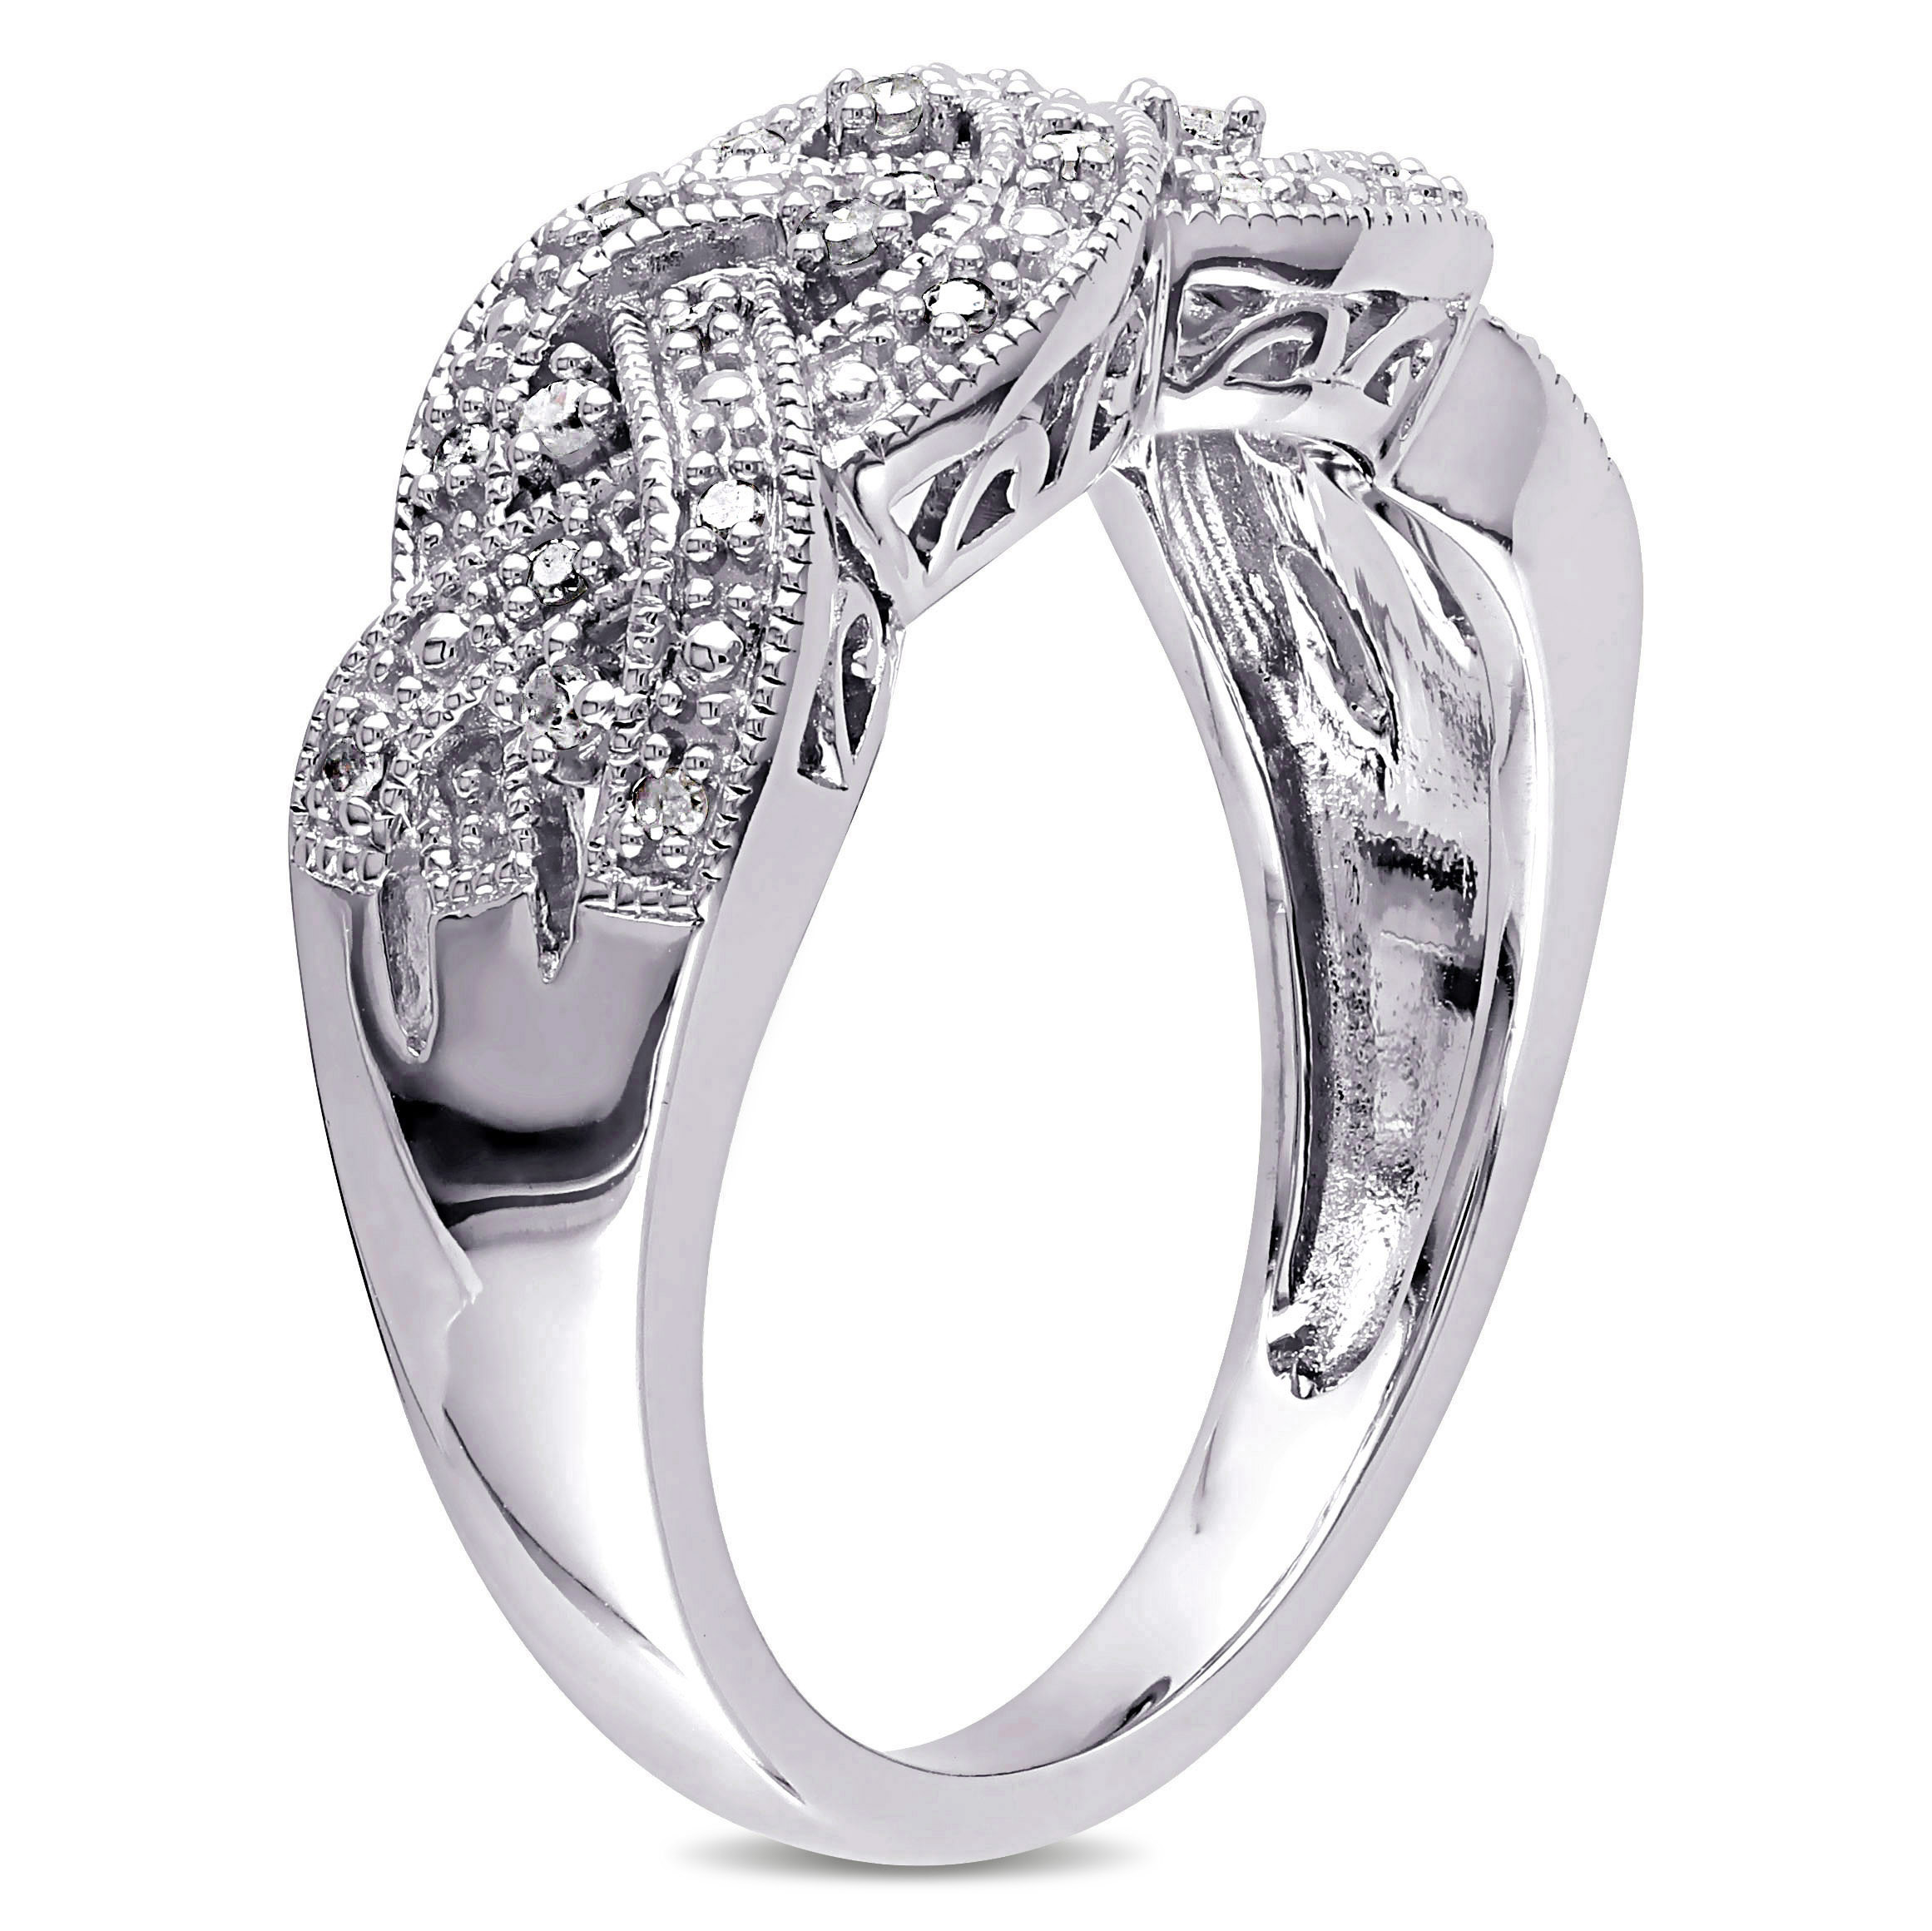 1/8 CT TW Braided Diamond Ring in Sterling Silver